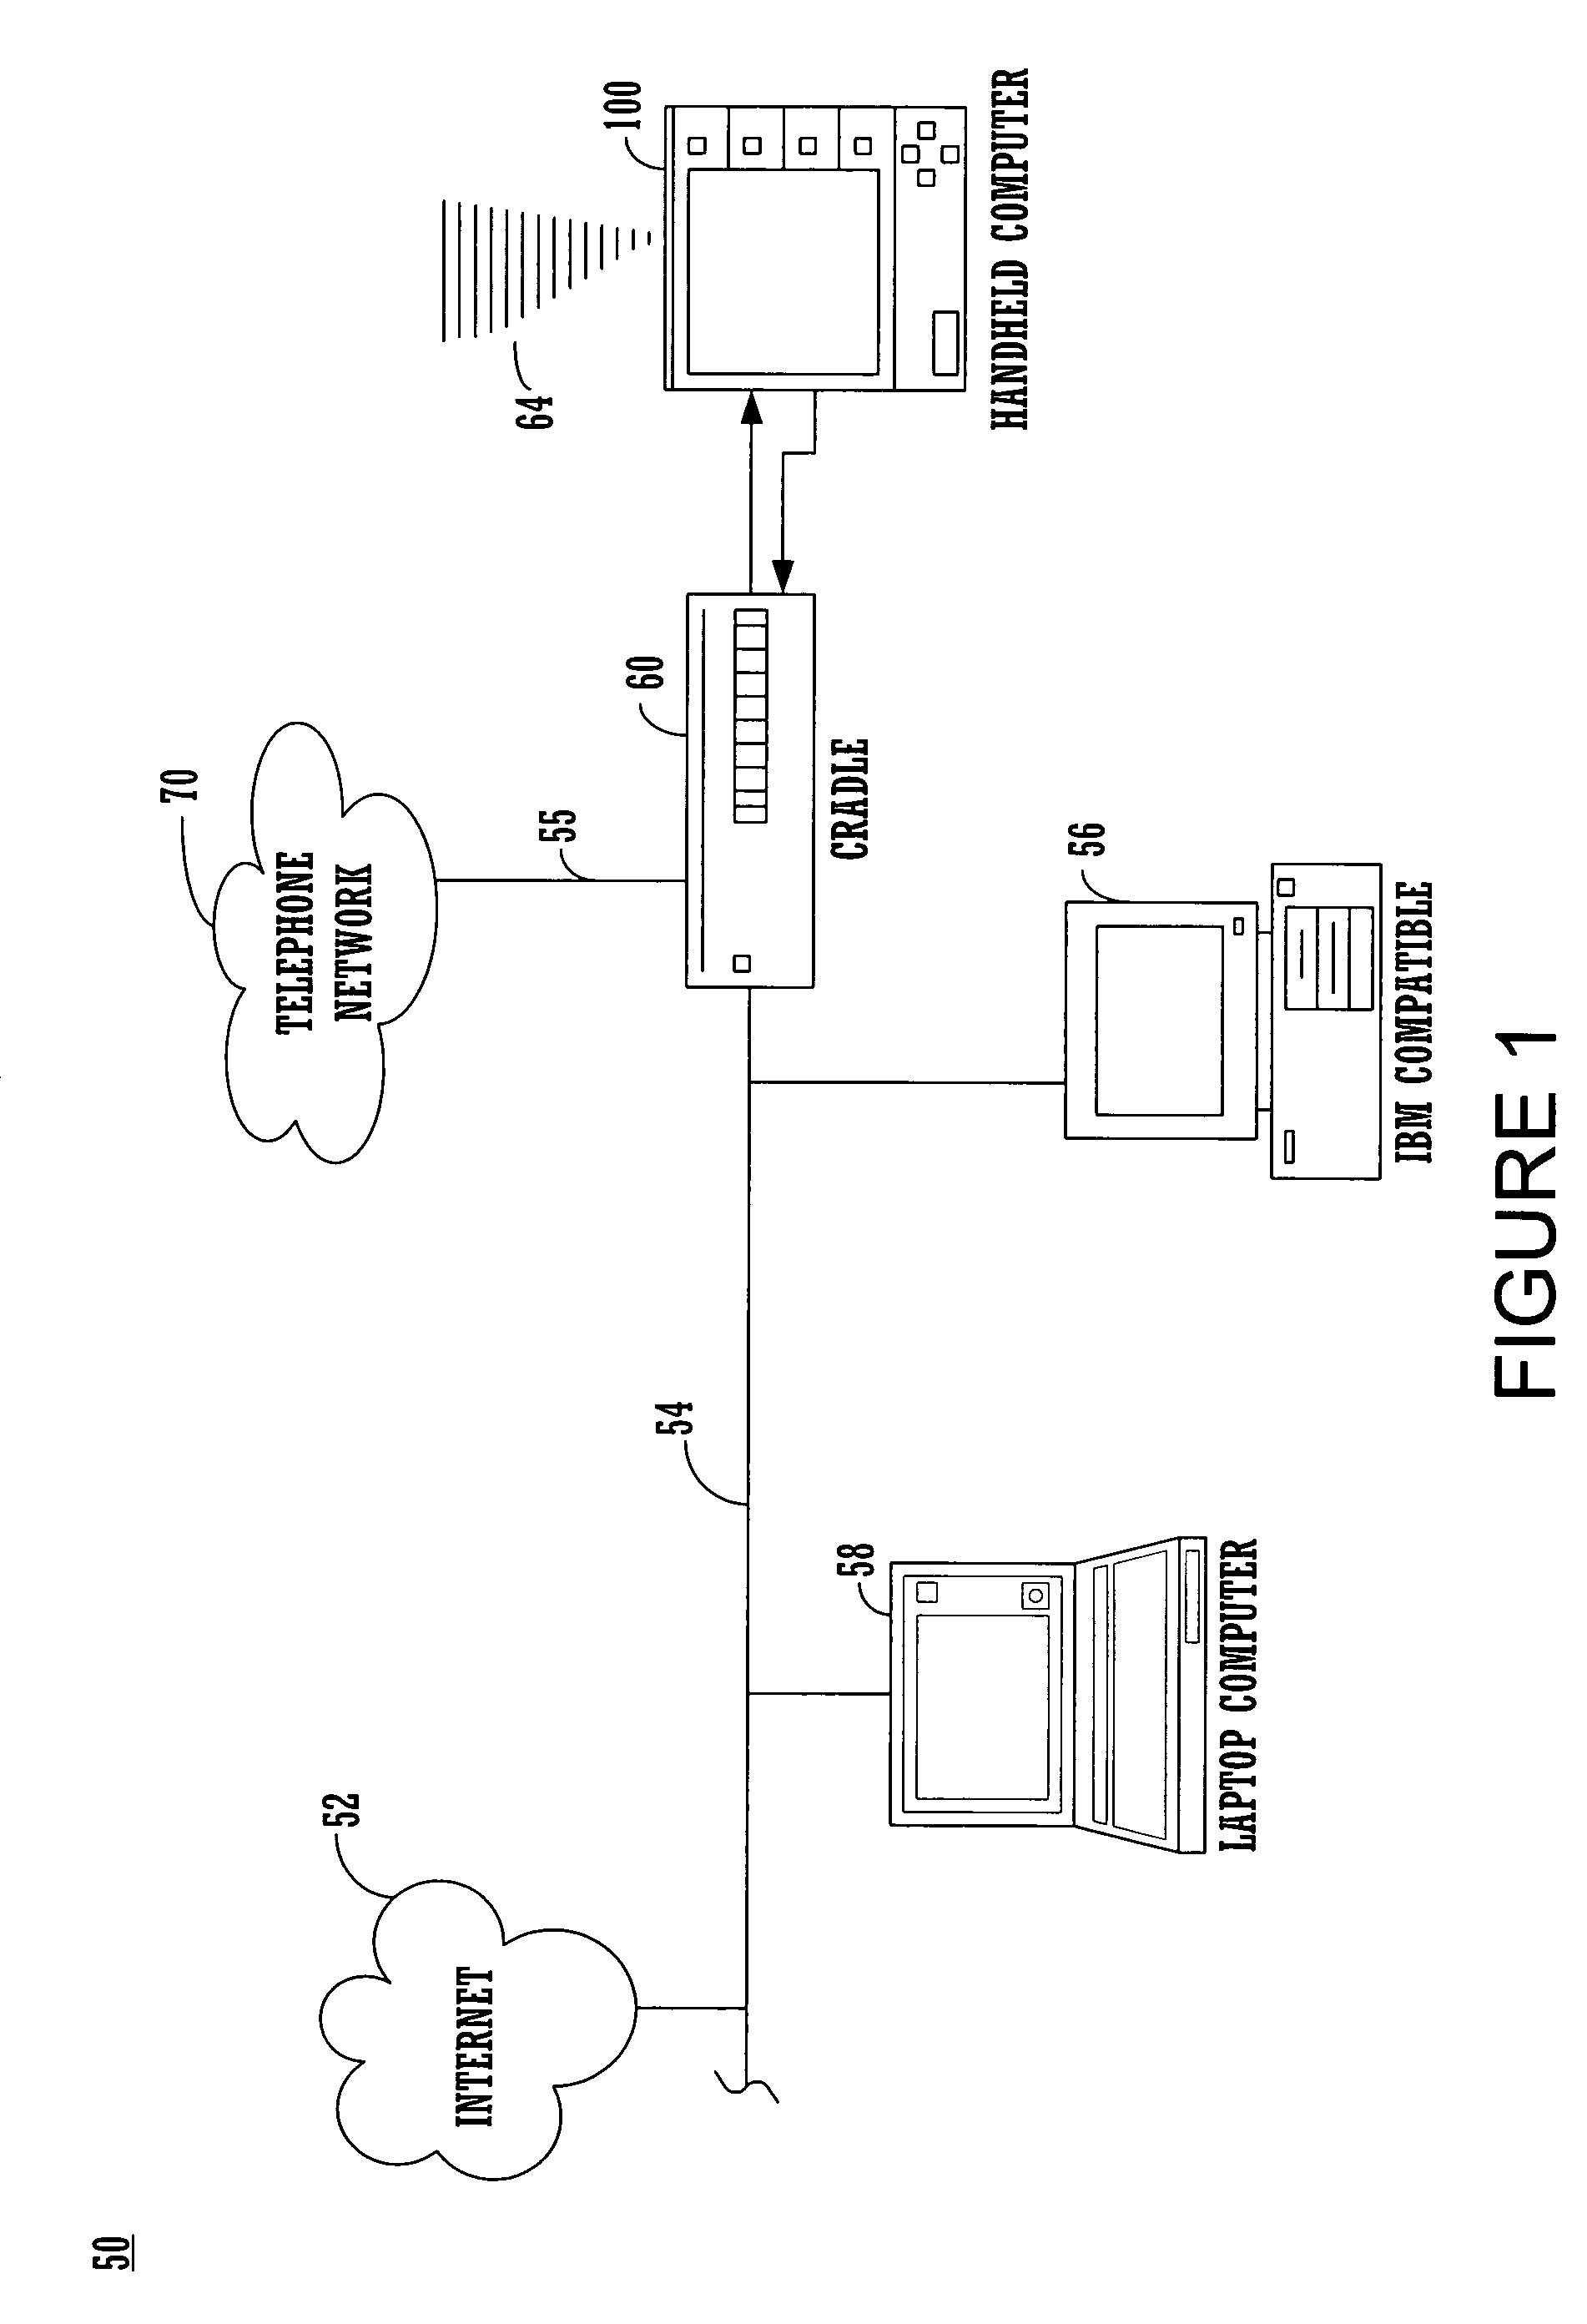 Method and system for providing information for identifying callers based on a partial number